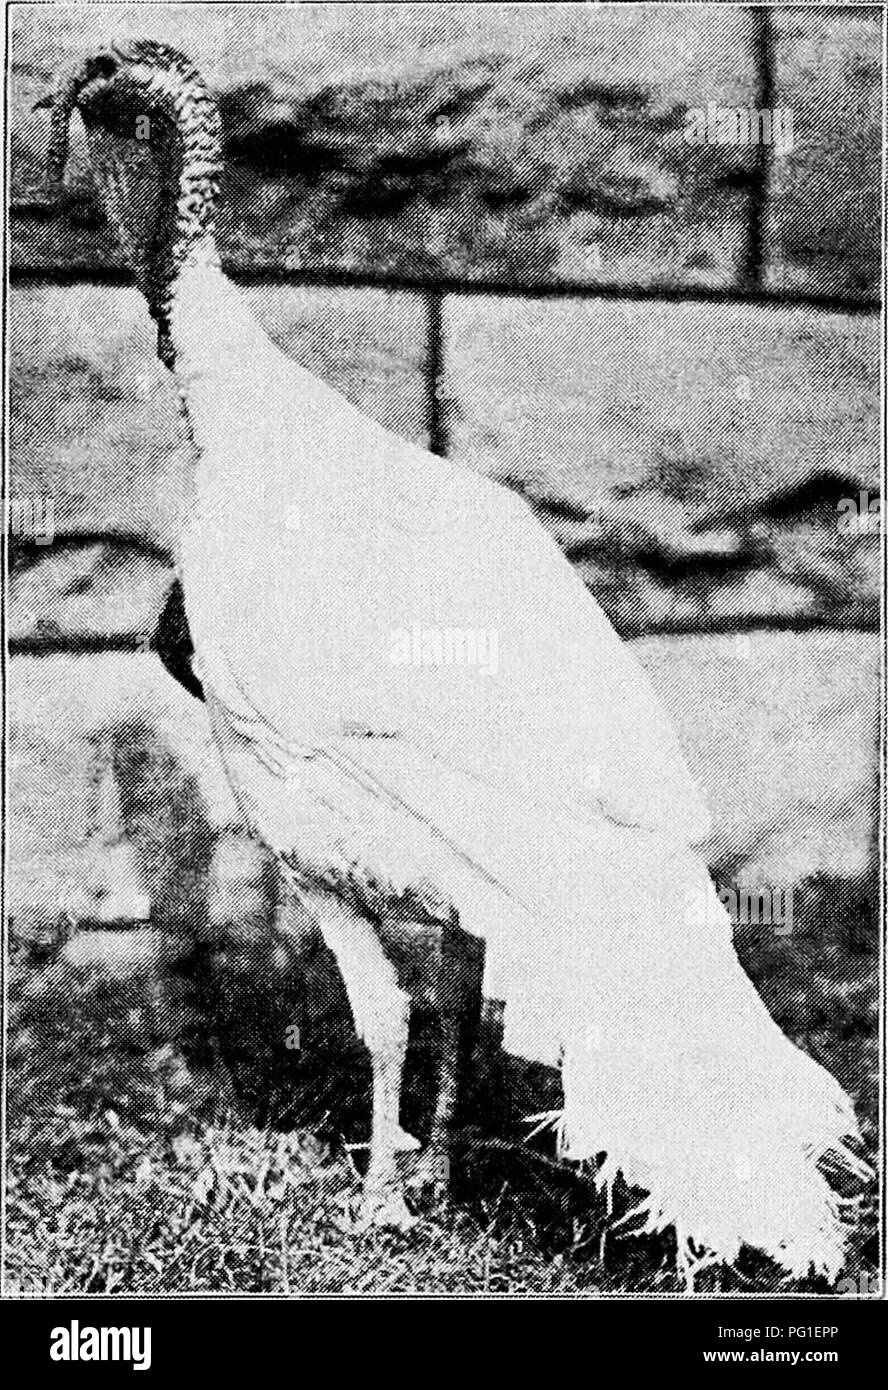 . Principles and practice of poultry culture . Poultry. TURKEYS, PEAFOWLS, GUINEAS, PHEASANTS 433 occurs often in wild turkeys and, mingling with the bronze, is doubt- less a most potent agent in keeping the color darker than that of the domestic bronze selected for lighter, more brilliant color. The White Turkey. When both white and black varieties of a bird are found, it is usual to consider the white a sport from the black. While such sports may occur, the history of white vari- eties of fowls shows that they are largely made up of white mongrels which ap- proach the desired type. The white Stock Photo